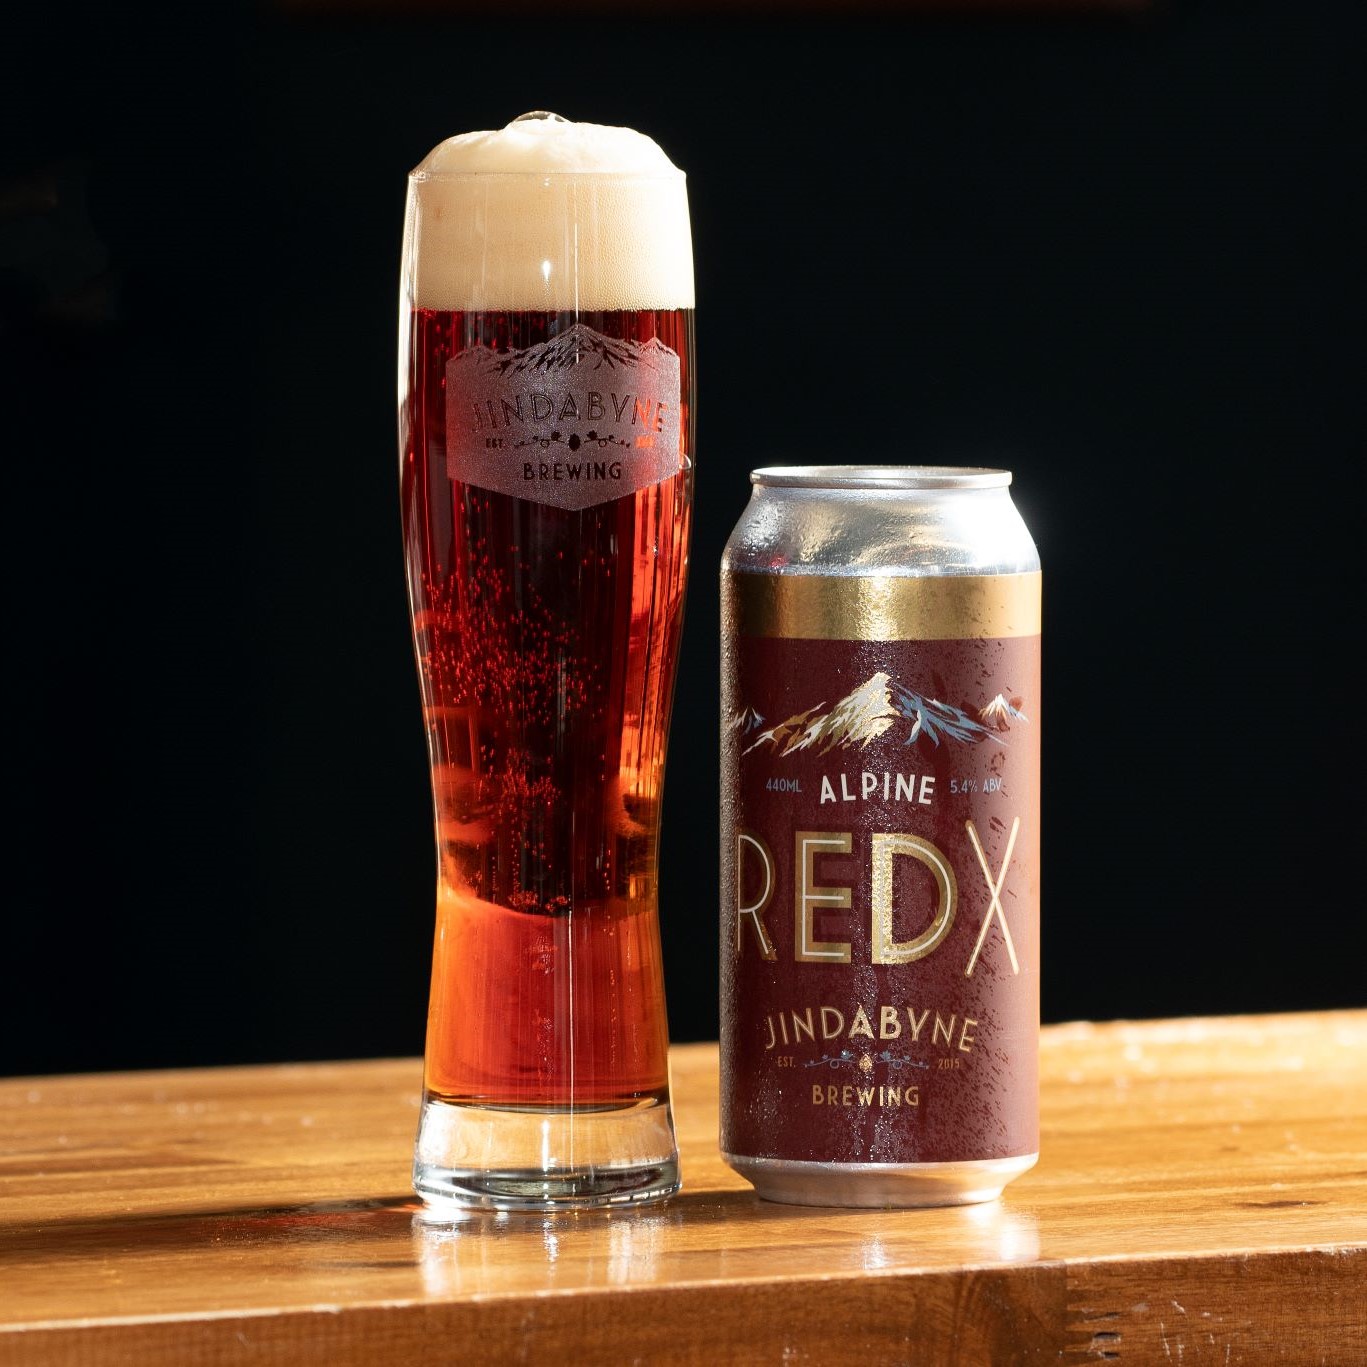 Red X beer at the Jindabyne Brewing Company